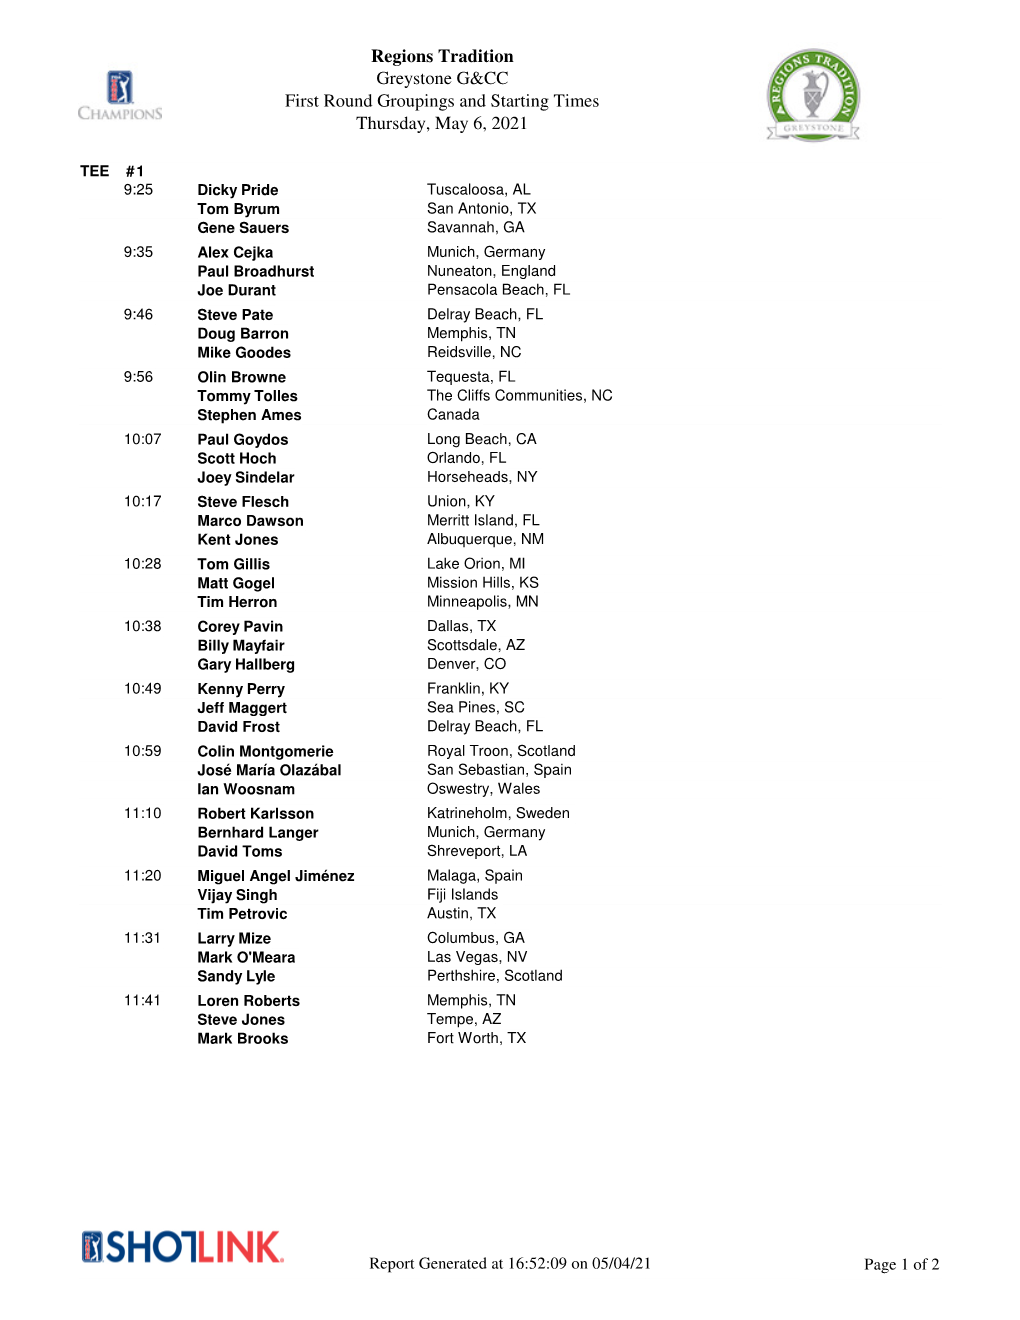 Regions Tradition Greystone G&CC First Round Groupings and Starting